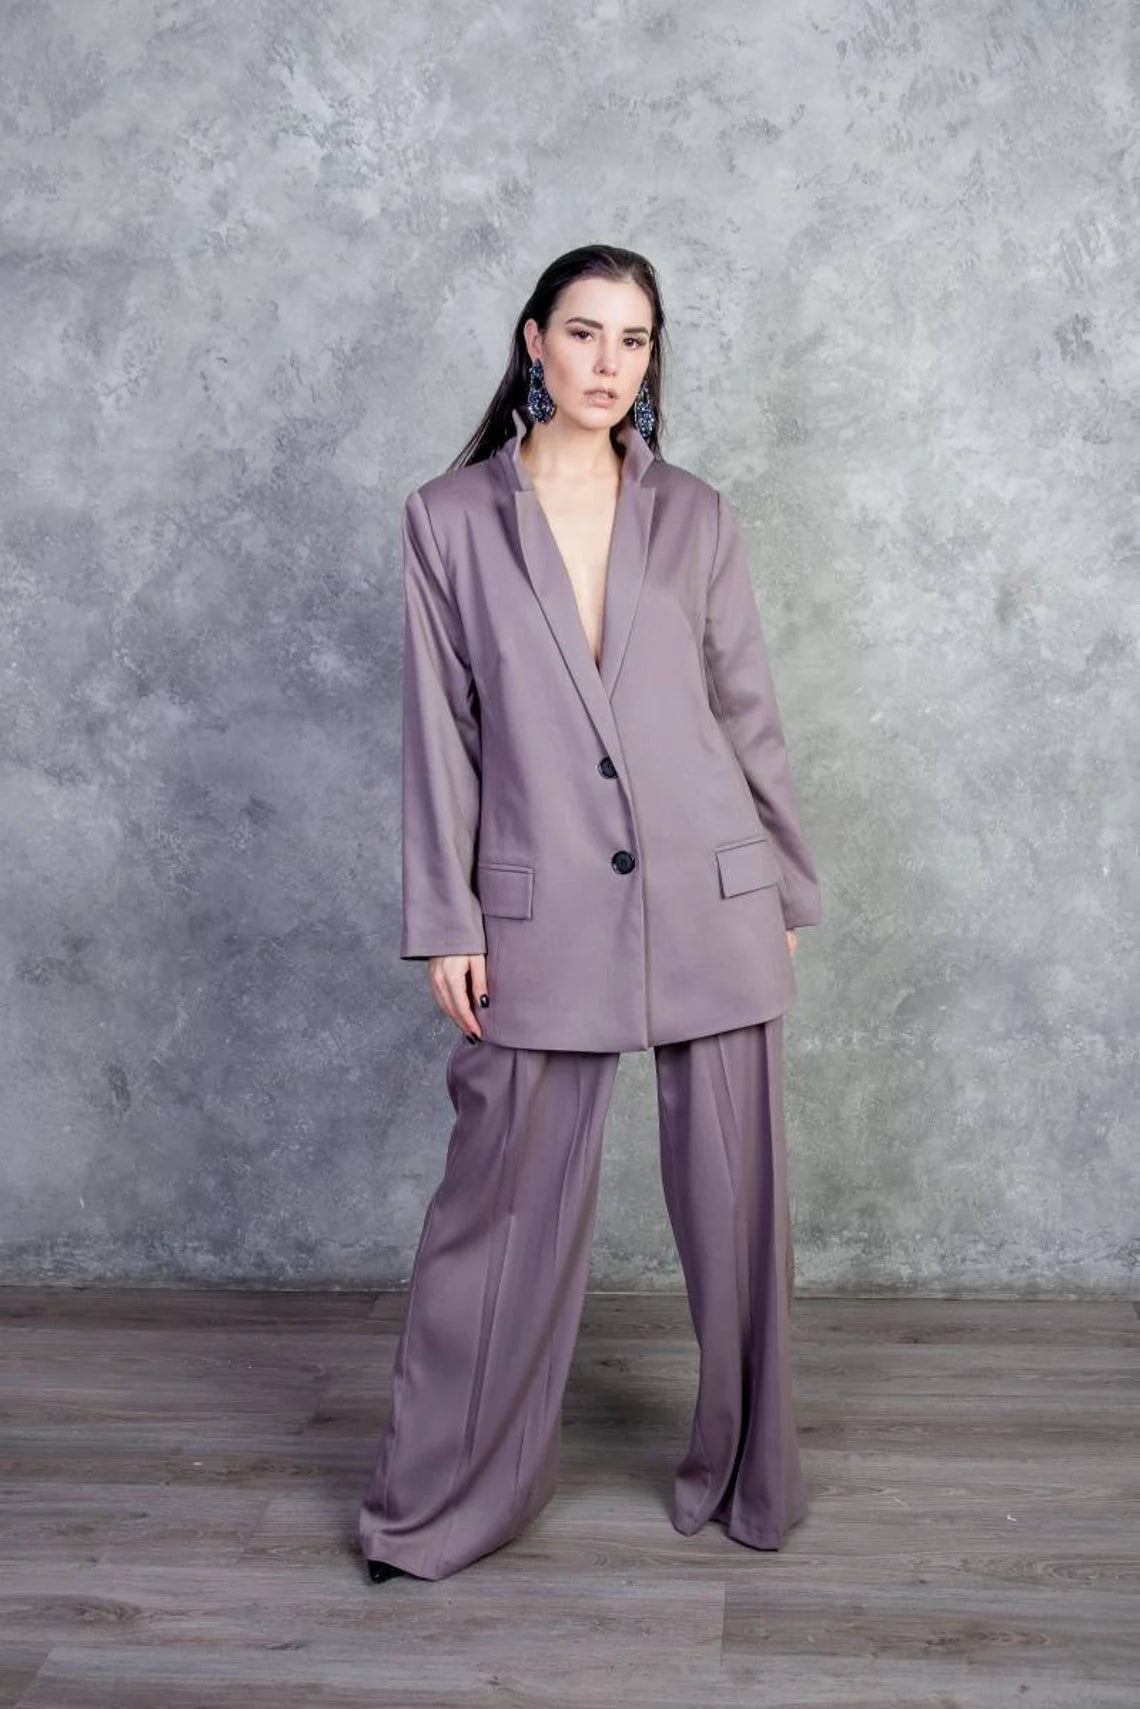 Suit. Women trouser suit. Trousers with pleats on the front and back, a loose fitting jacket, oversized, Long jacke